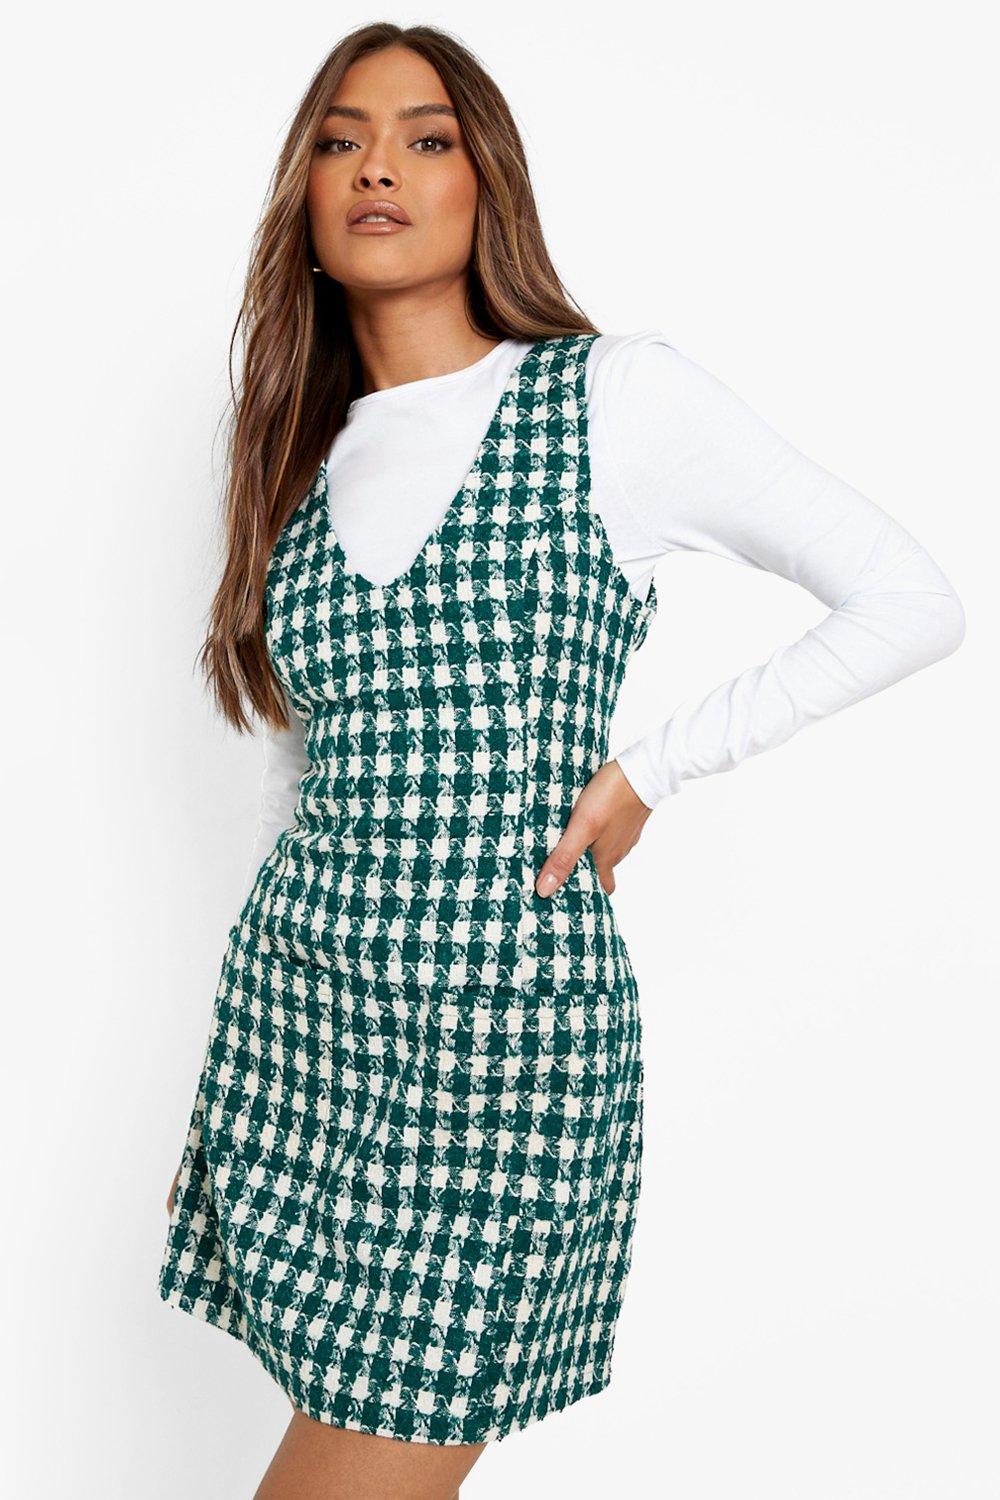 1960s Style Clothing & 60s Fashion Womens Dogtooth Scoop Neck Pinafore Dress - Green - 10 $24.00 AT vintagedancer.com